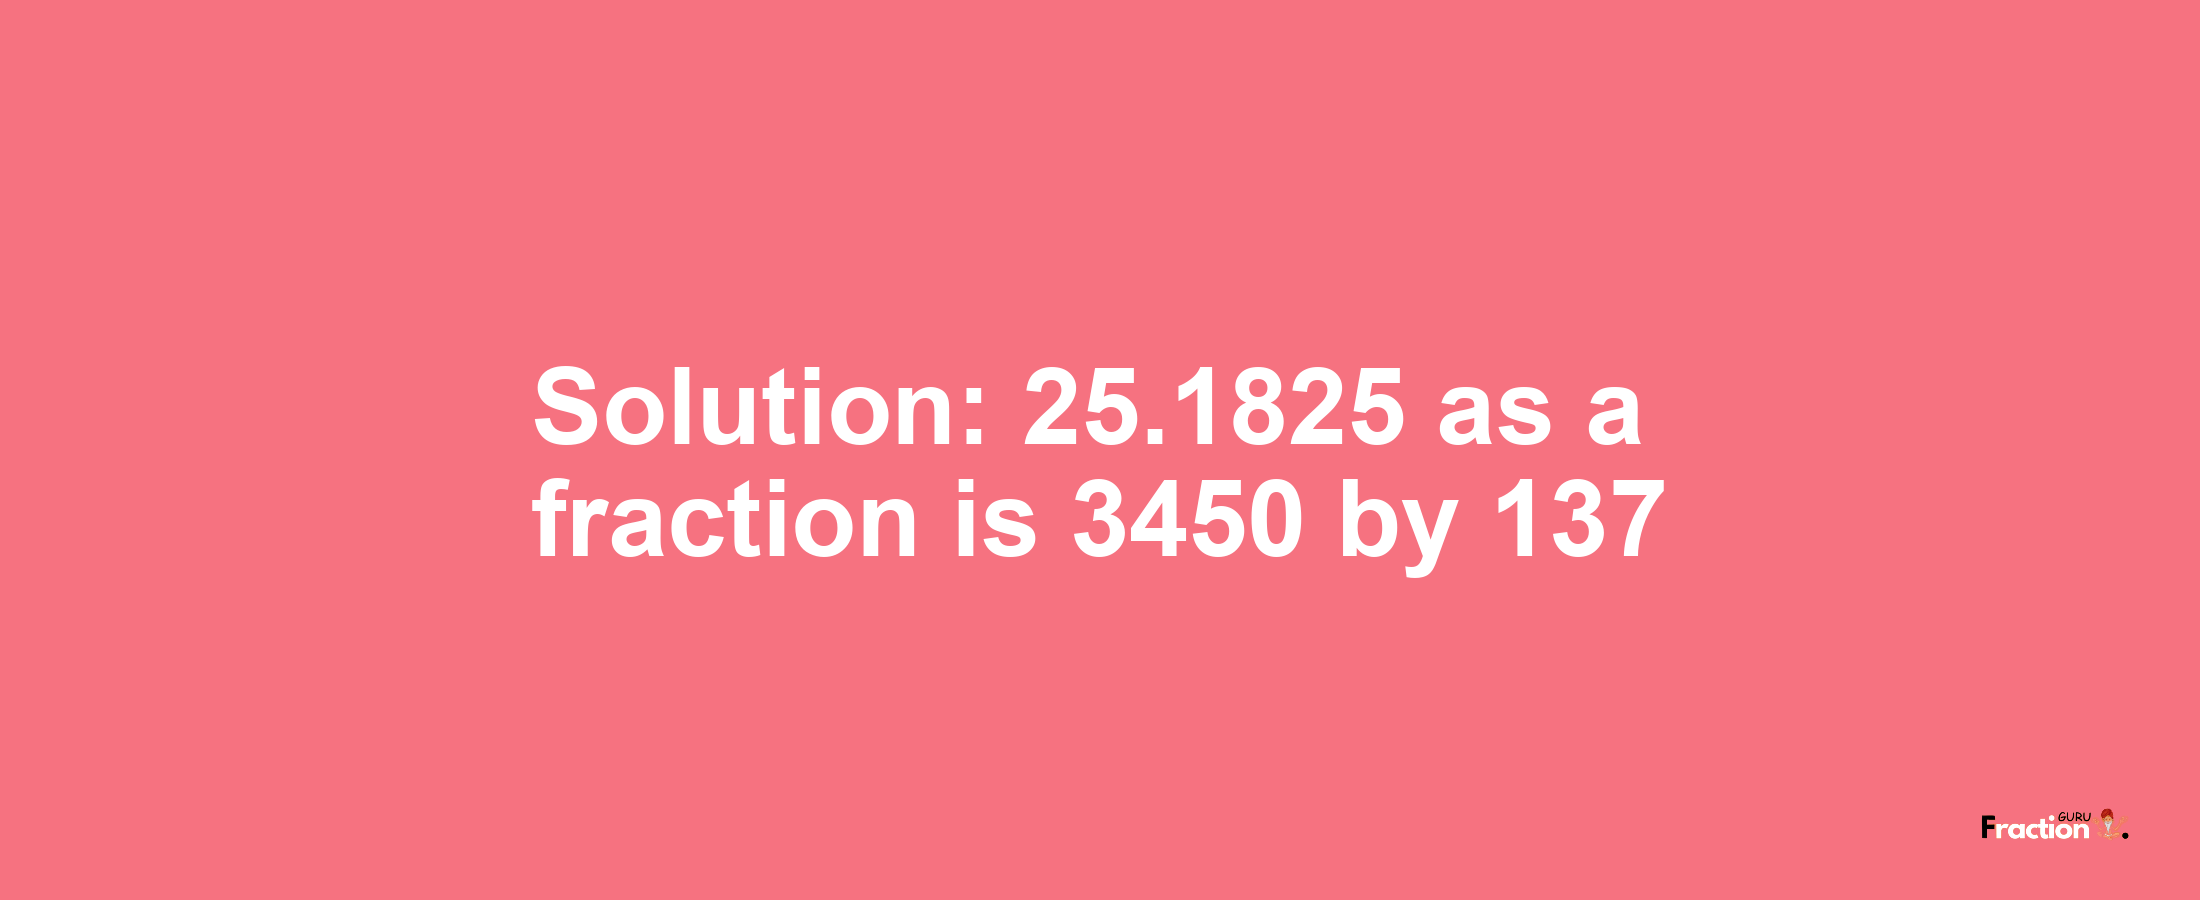 Solution:25.1825 as a fraction is 3450/137